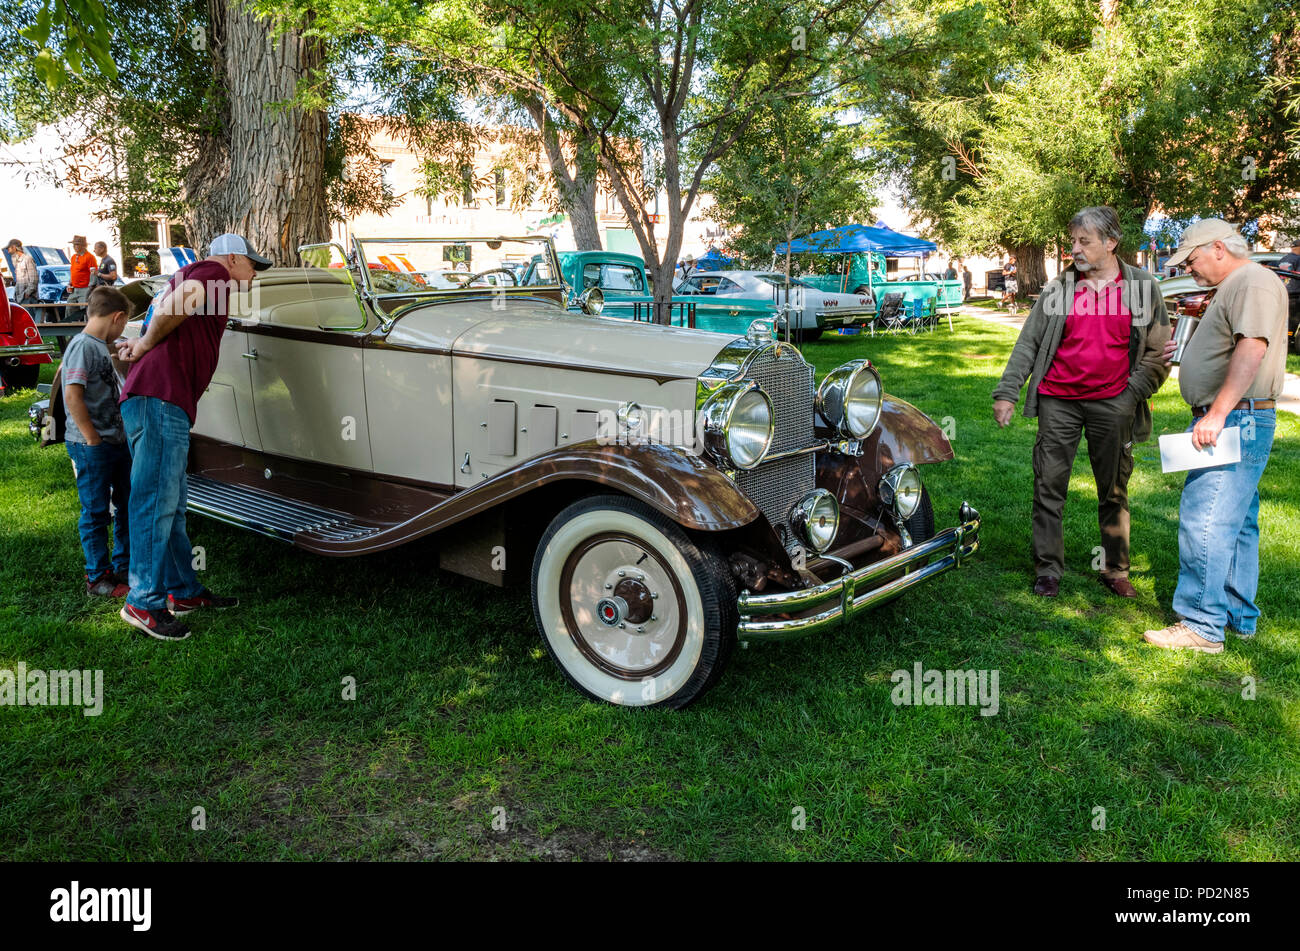 1931 Antique Packard Roadster convertible; Angel of Shavano Car Show, fund raiser for Chaffee County Search & Rescue South, Salida, Colorado, USA Stock Photo